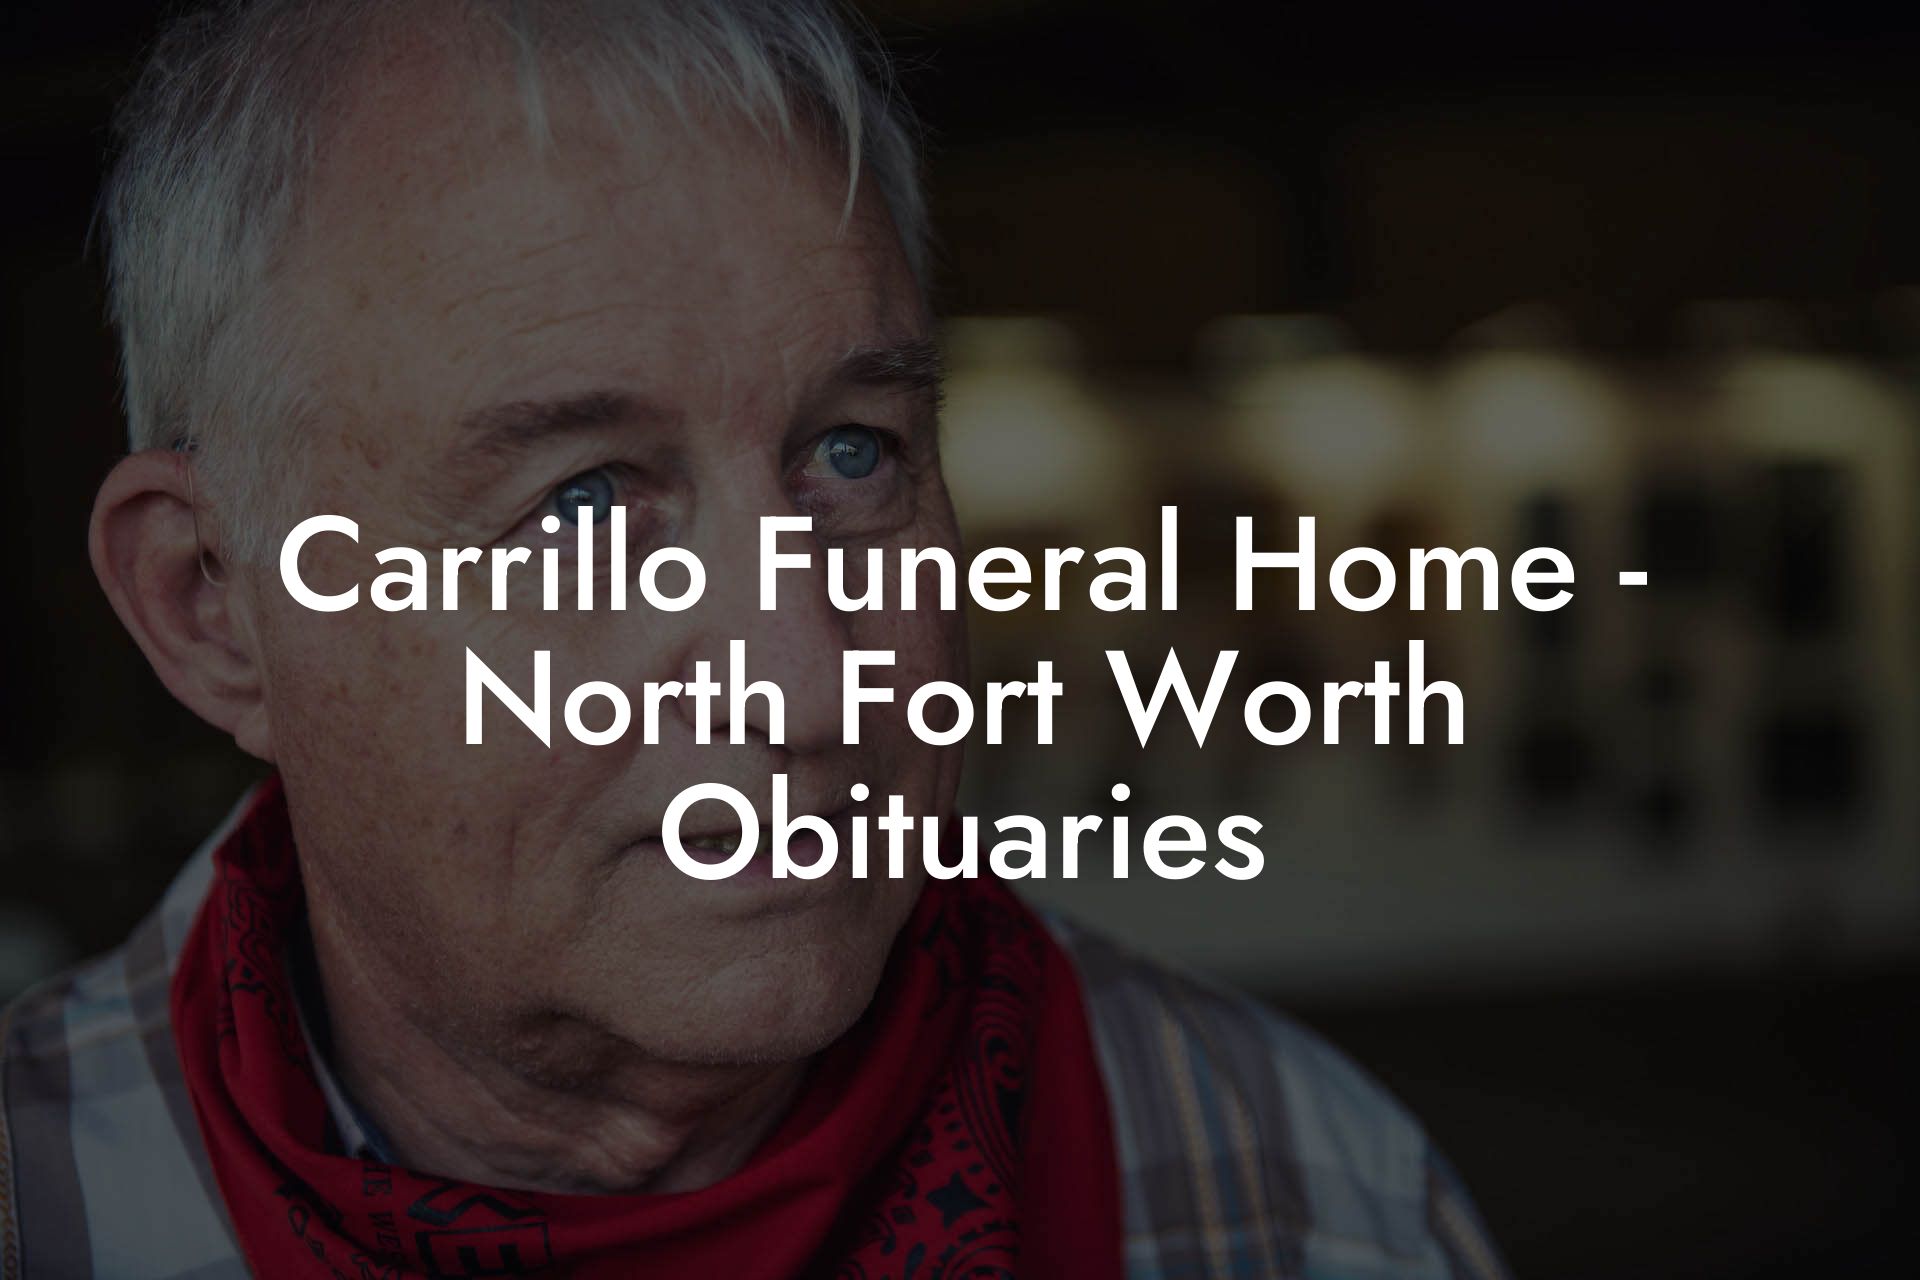 Carrillo Funeral Home - North Fort Worth Obituaries